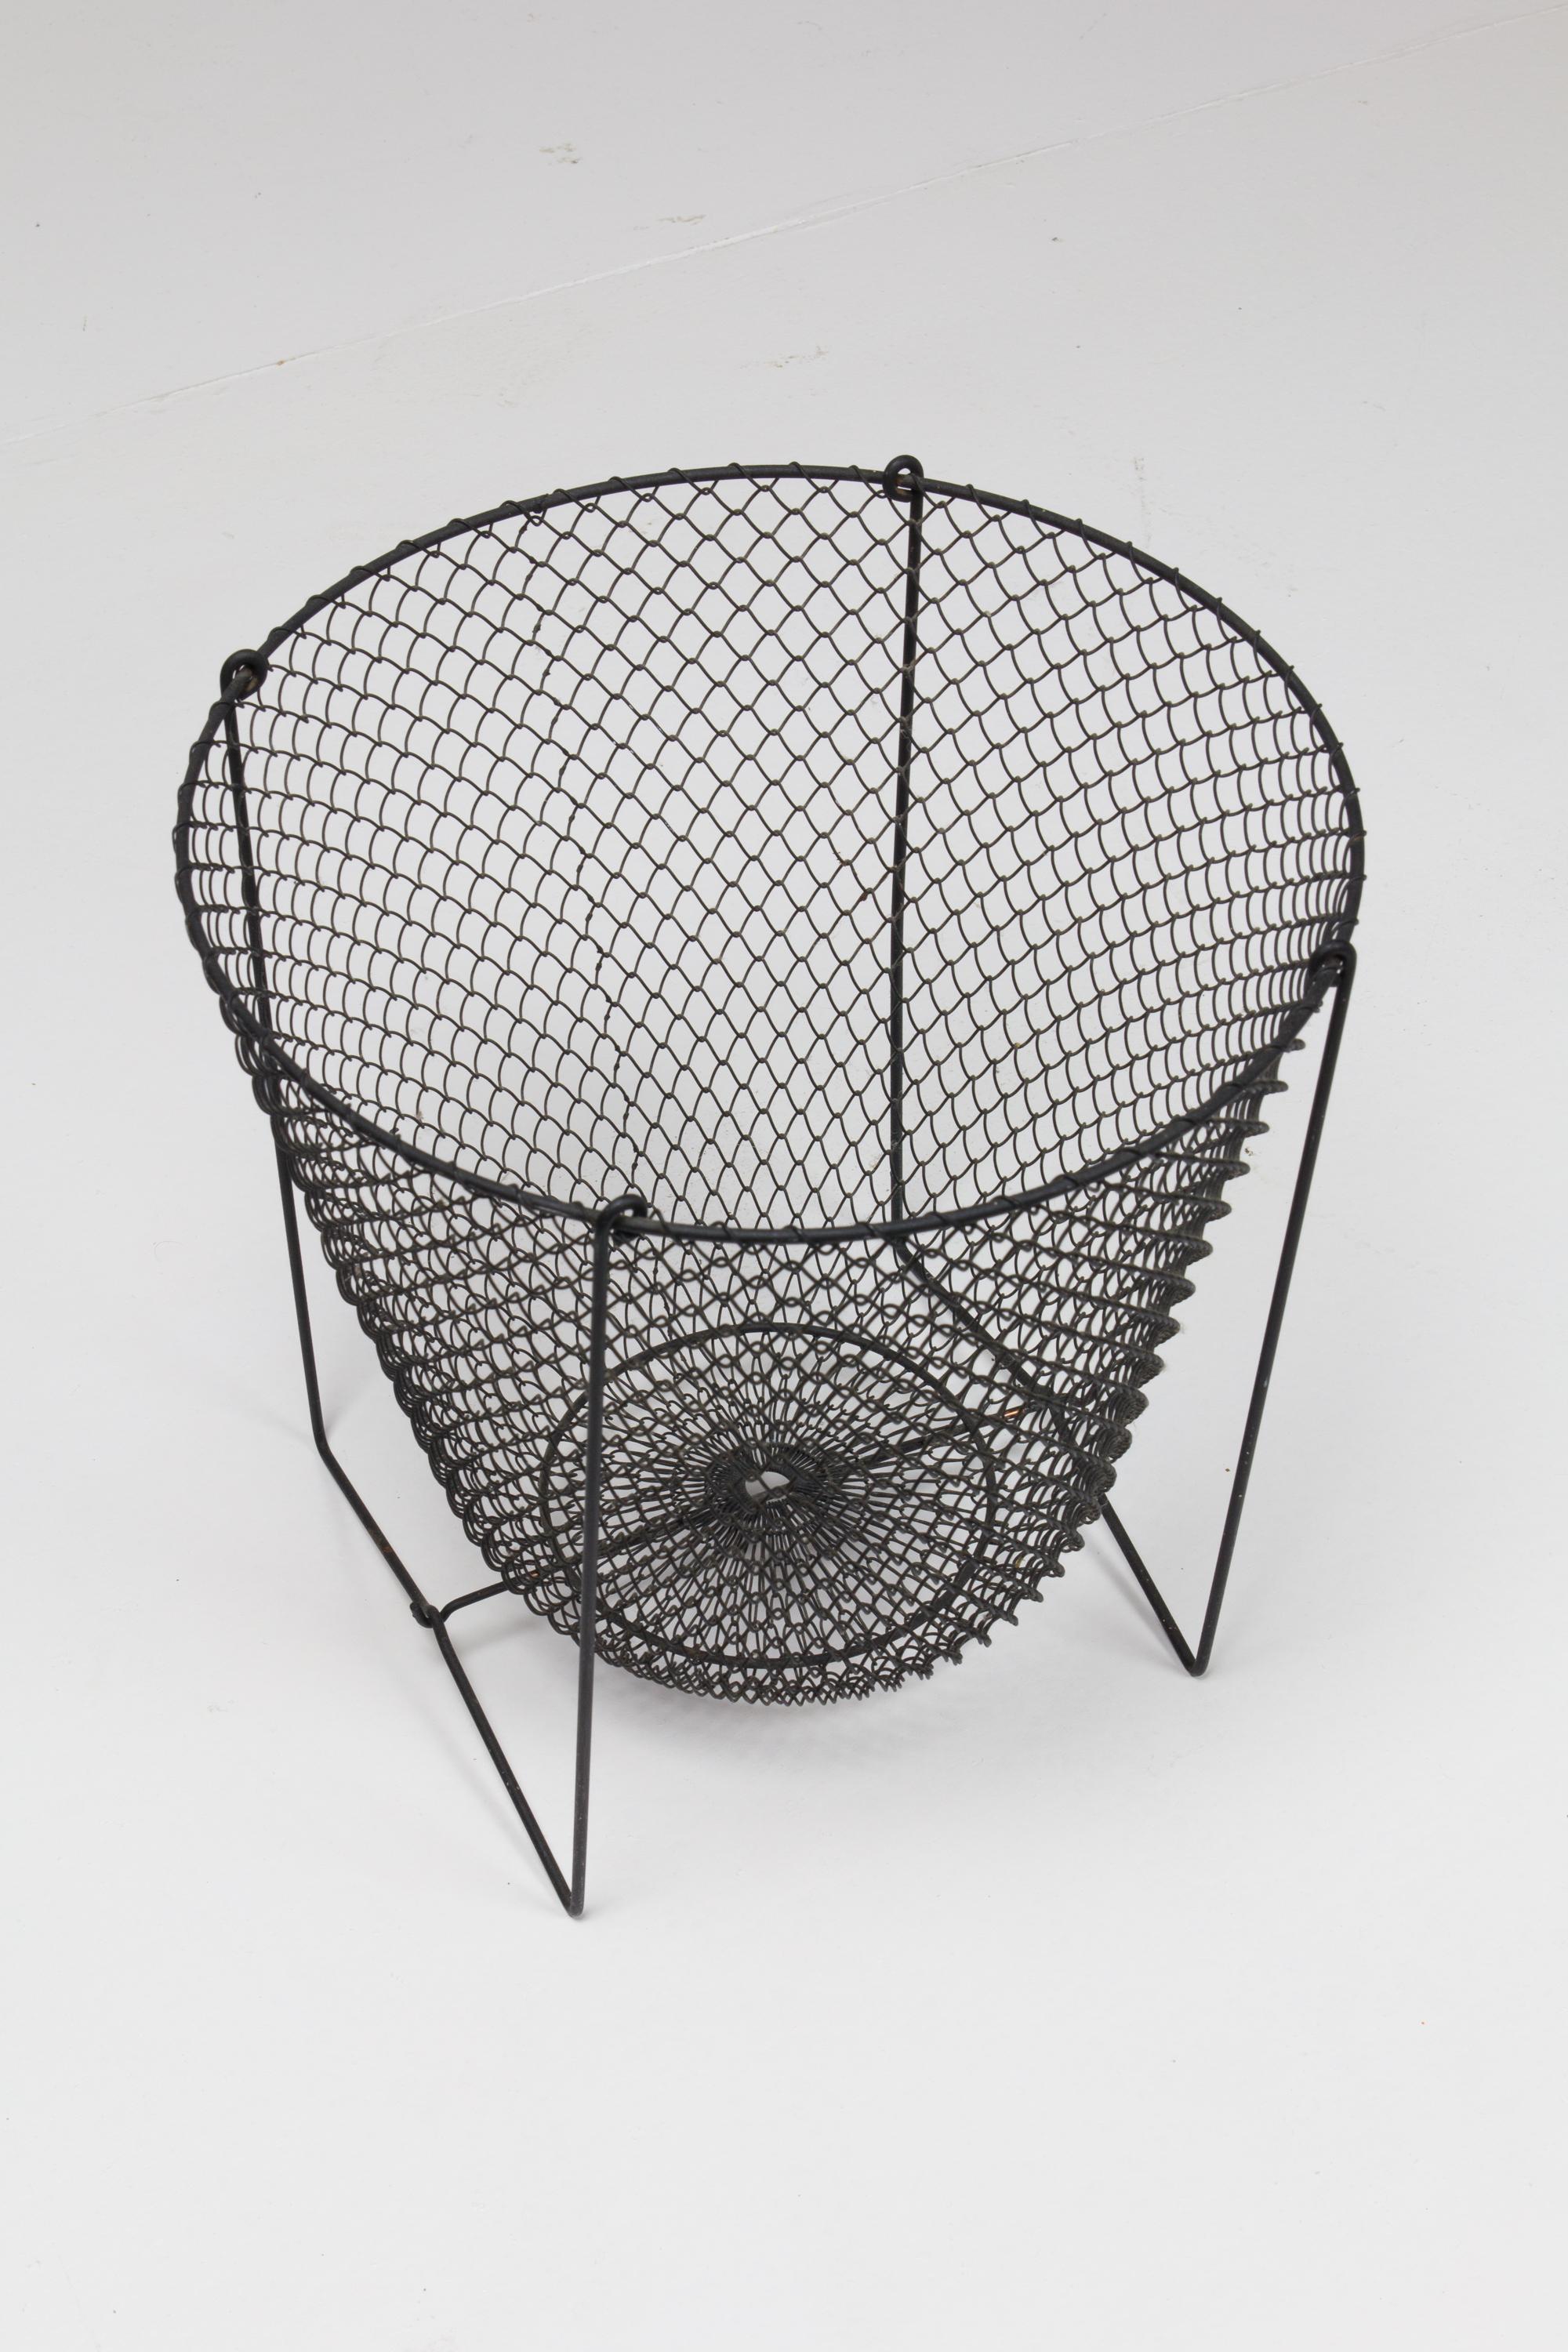 Unusual wastepaper bin comprised of thin wire and wire basket mesh suspended on frame.